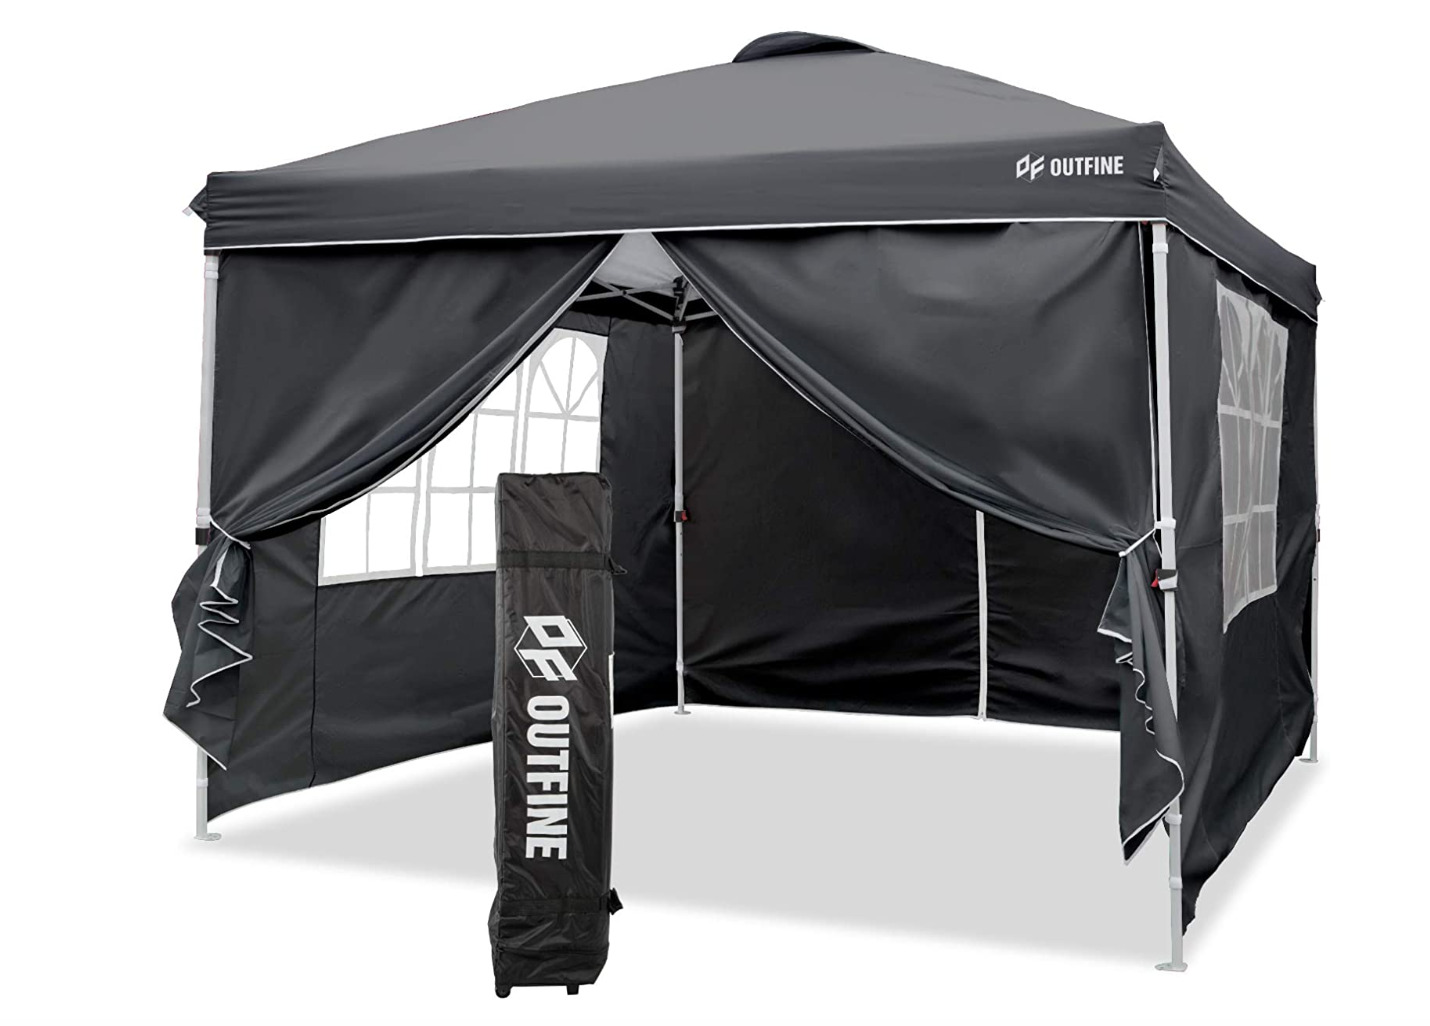 OUTFINE Canopy 10'x10' Pop Up Commercial Instant Gazebo Tent, Fully Waterproo...